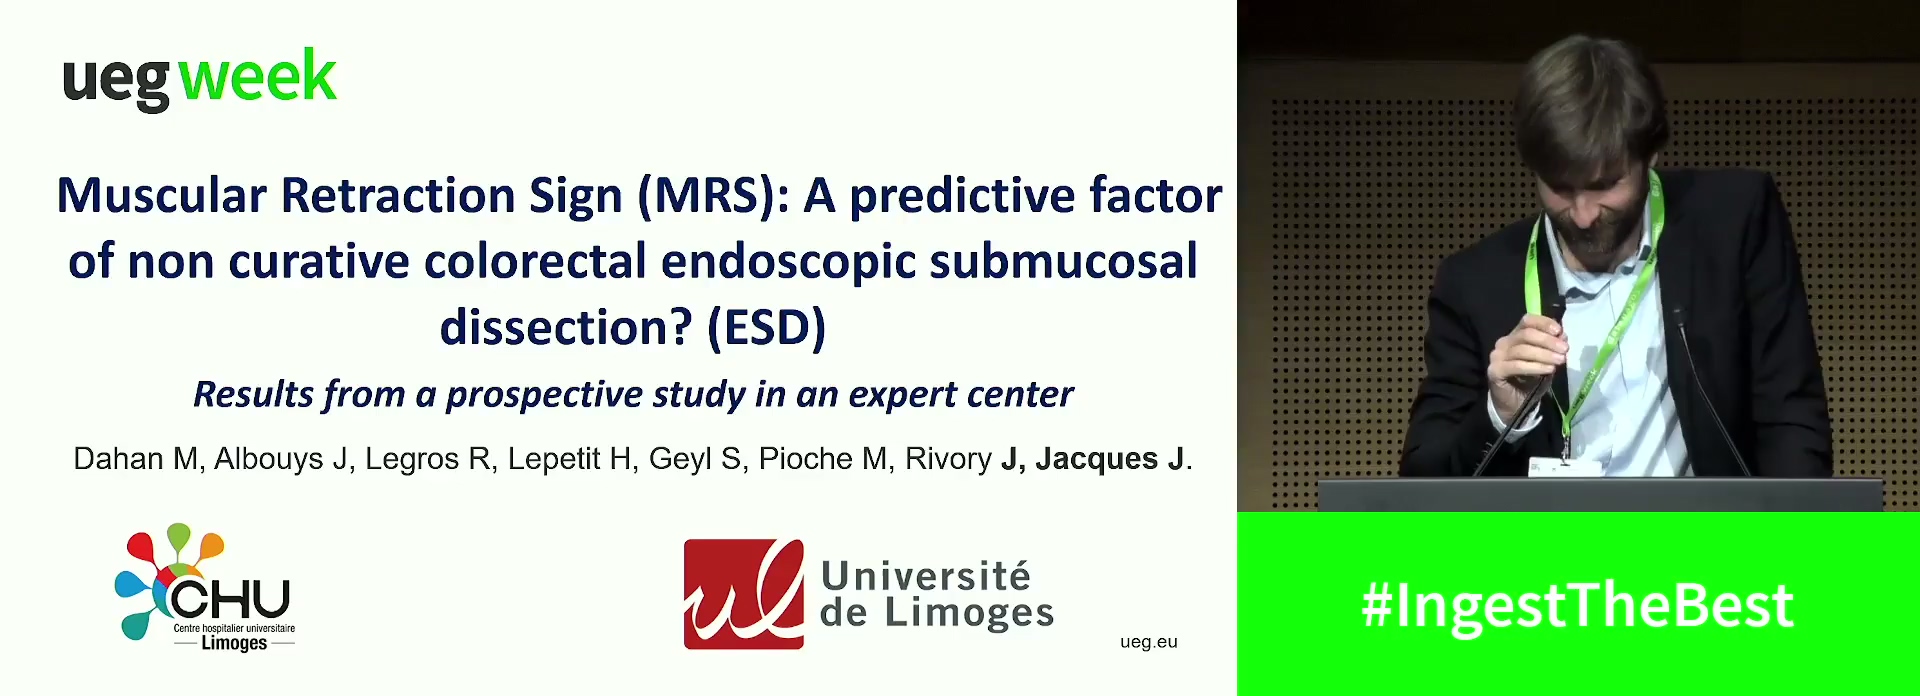 MUSCULAR RETRACTION SIGN (MRS): A PREDICTIVE FACTOR OF NON-CURATIVE COLORECTAL ENDOSCOPIC SUBMUCOSAL DISSECTION (ESD)? RESULTS OF A PROSPECTIVE STUDY IN AN EXPERT CENTER